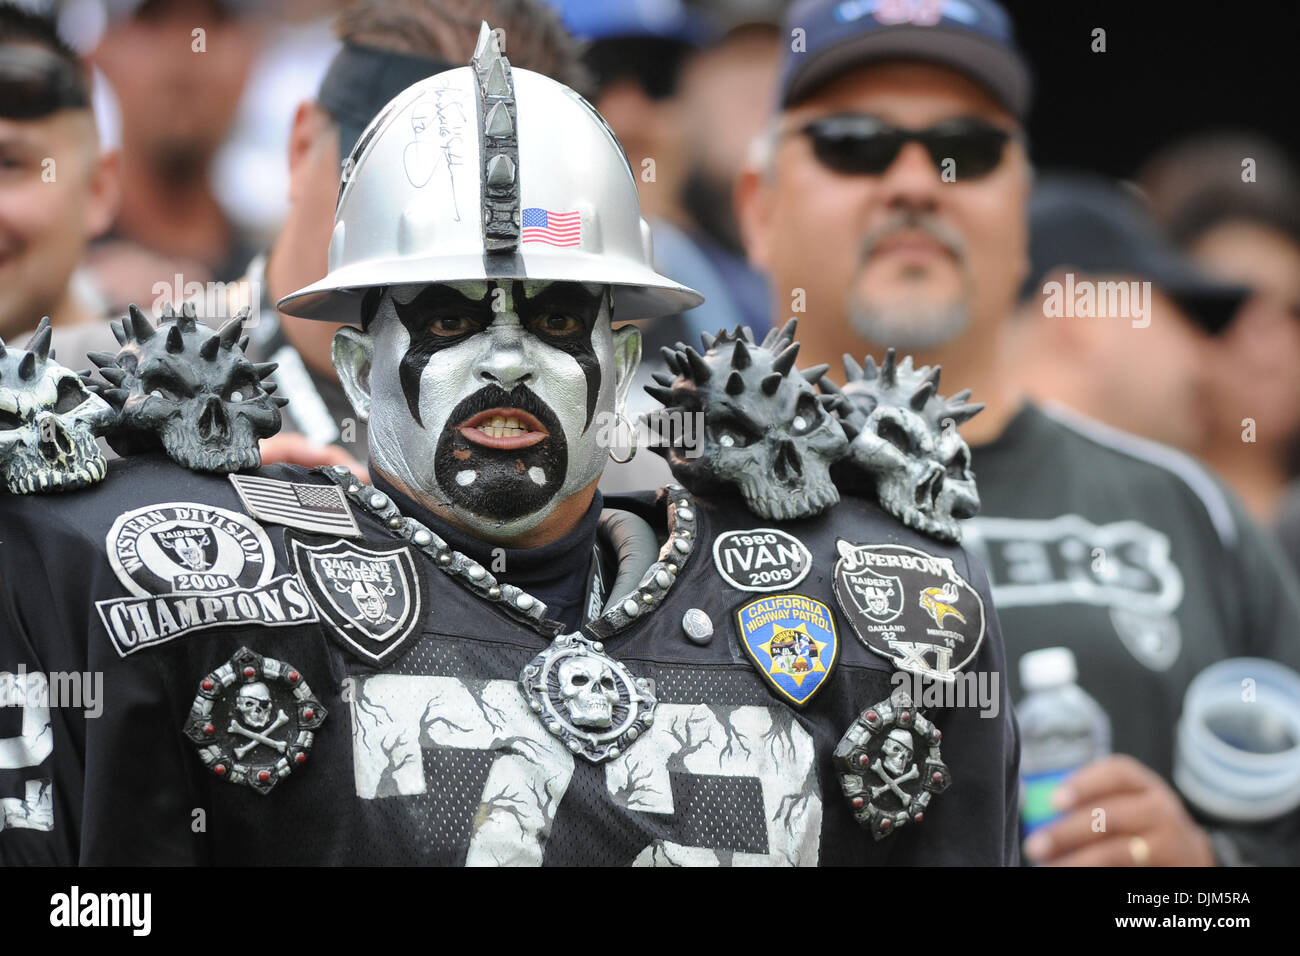 United States of America - A Raiders fan cheers on his team during the NFL ...